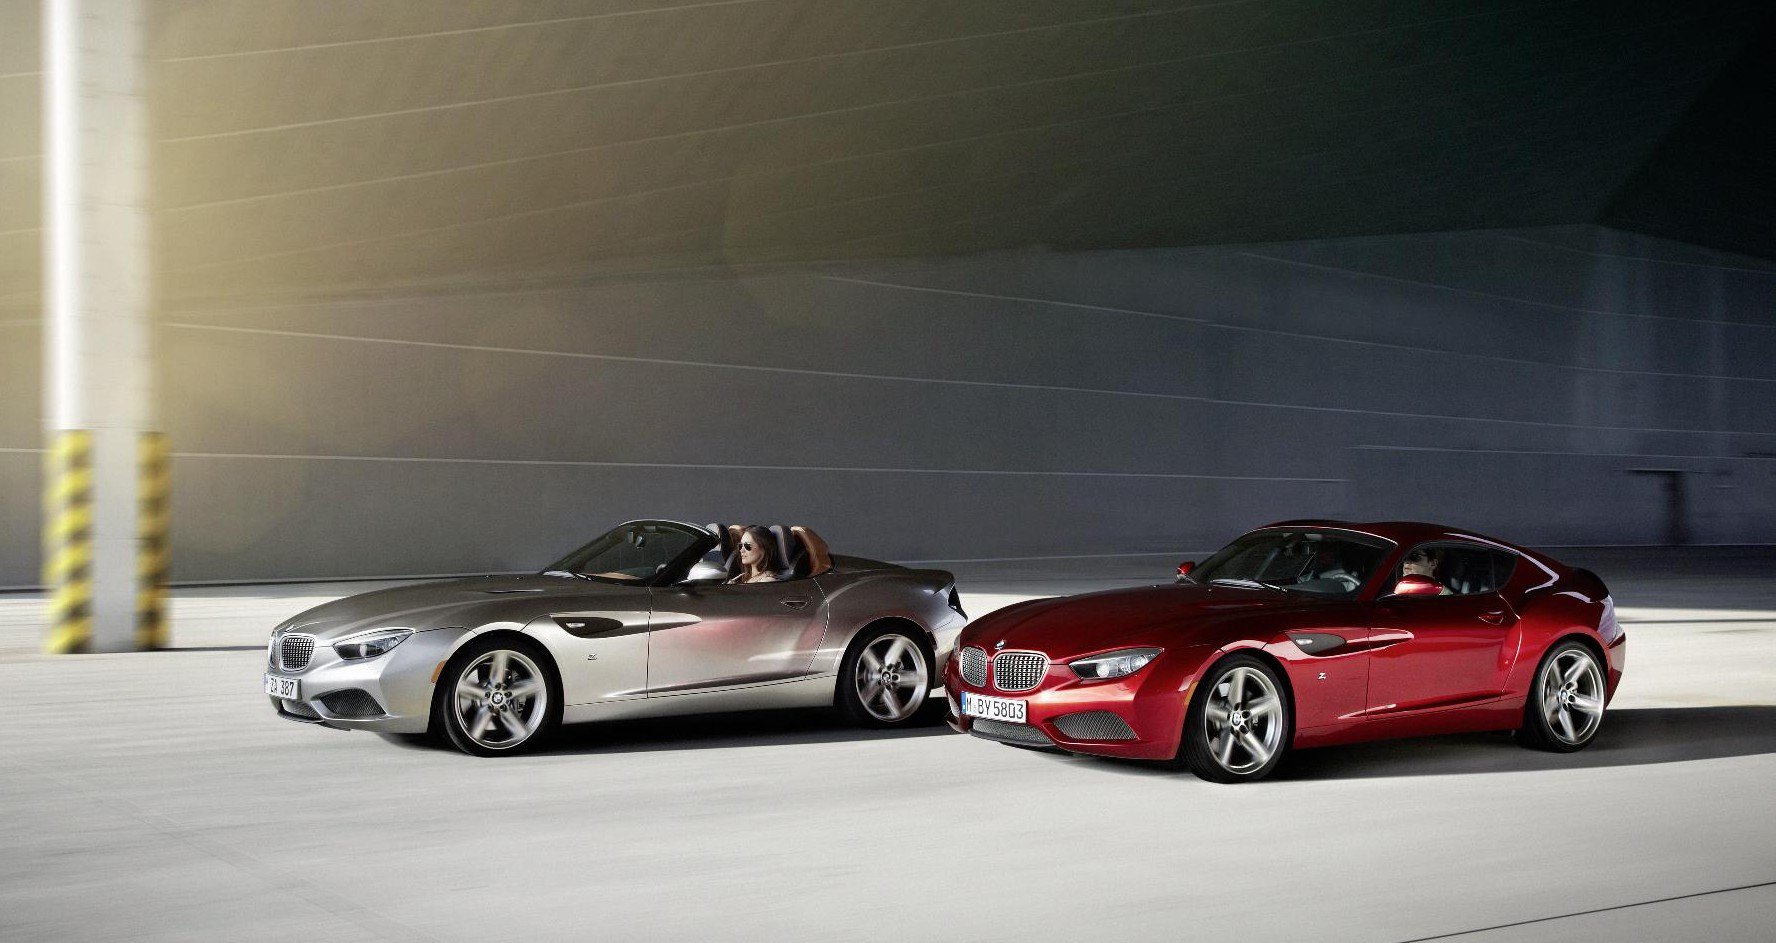 Bmw Zagato Roadster Backgrounds on Wallpapers Vista